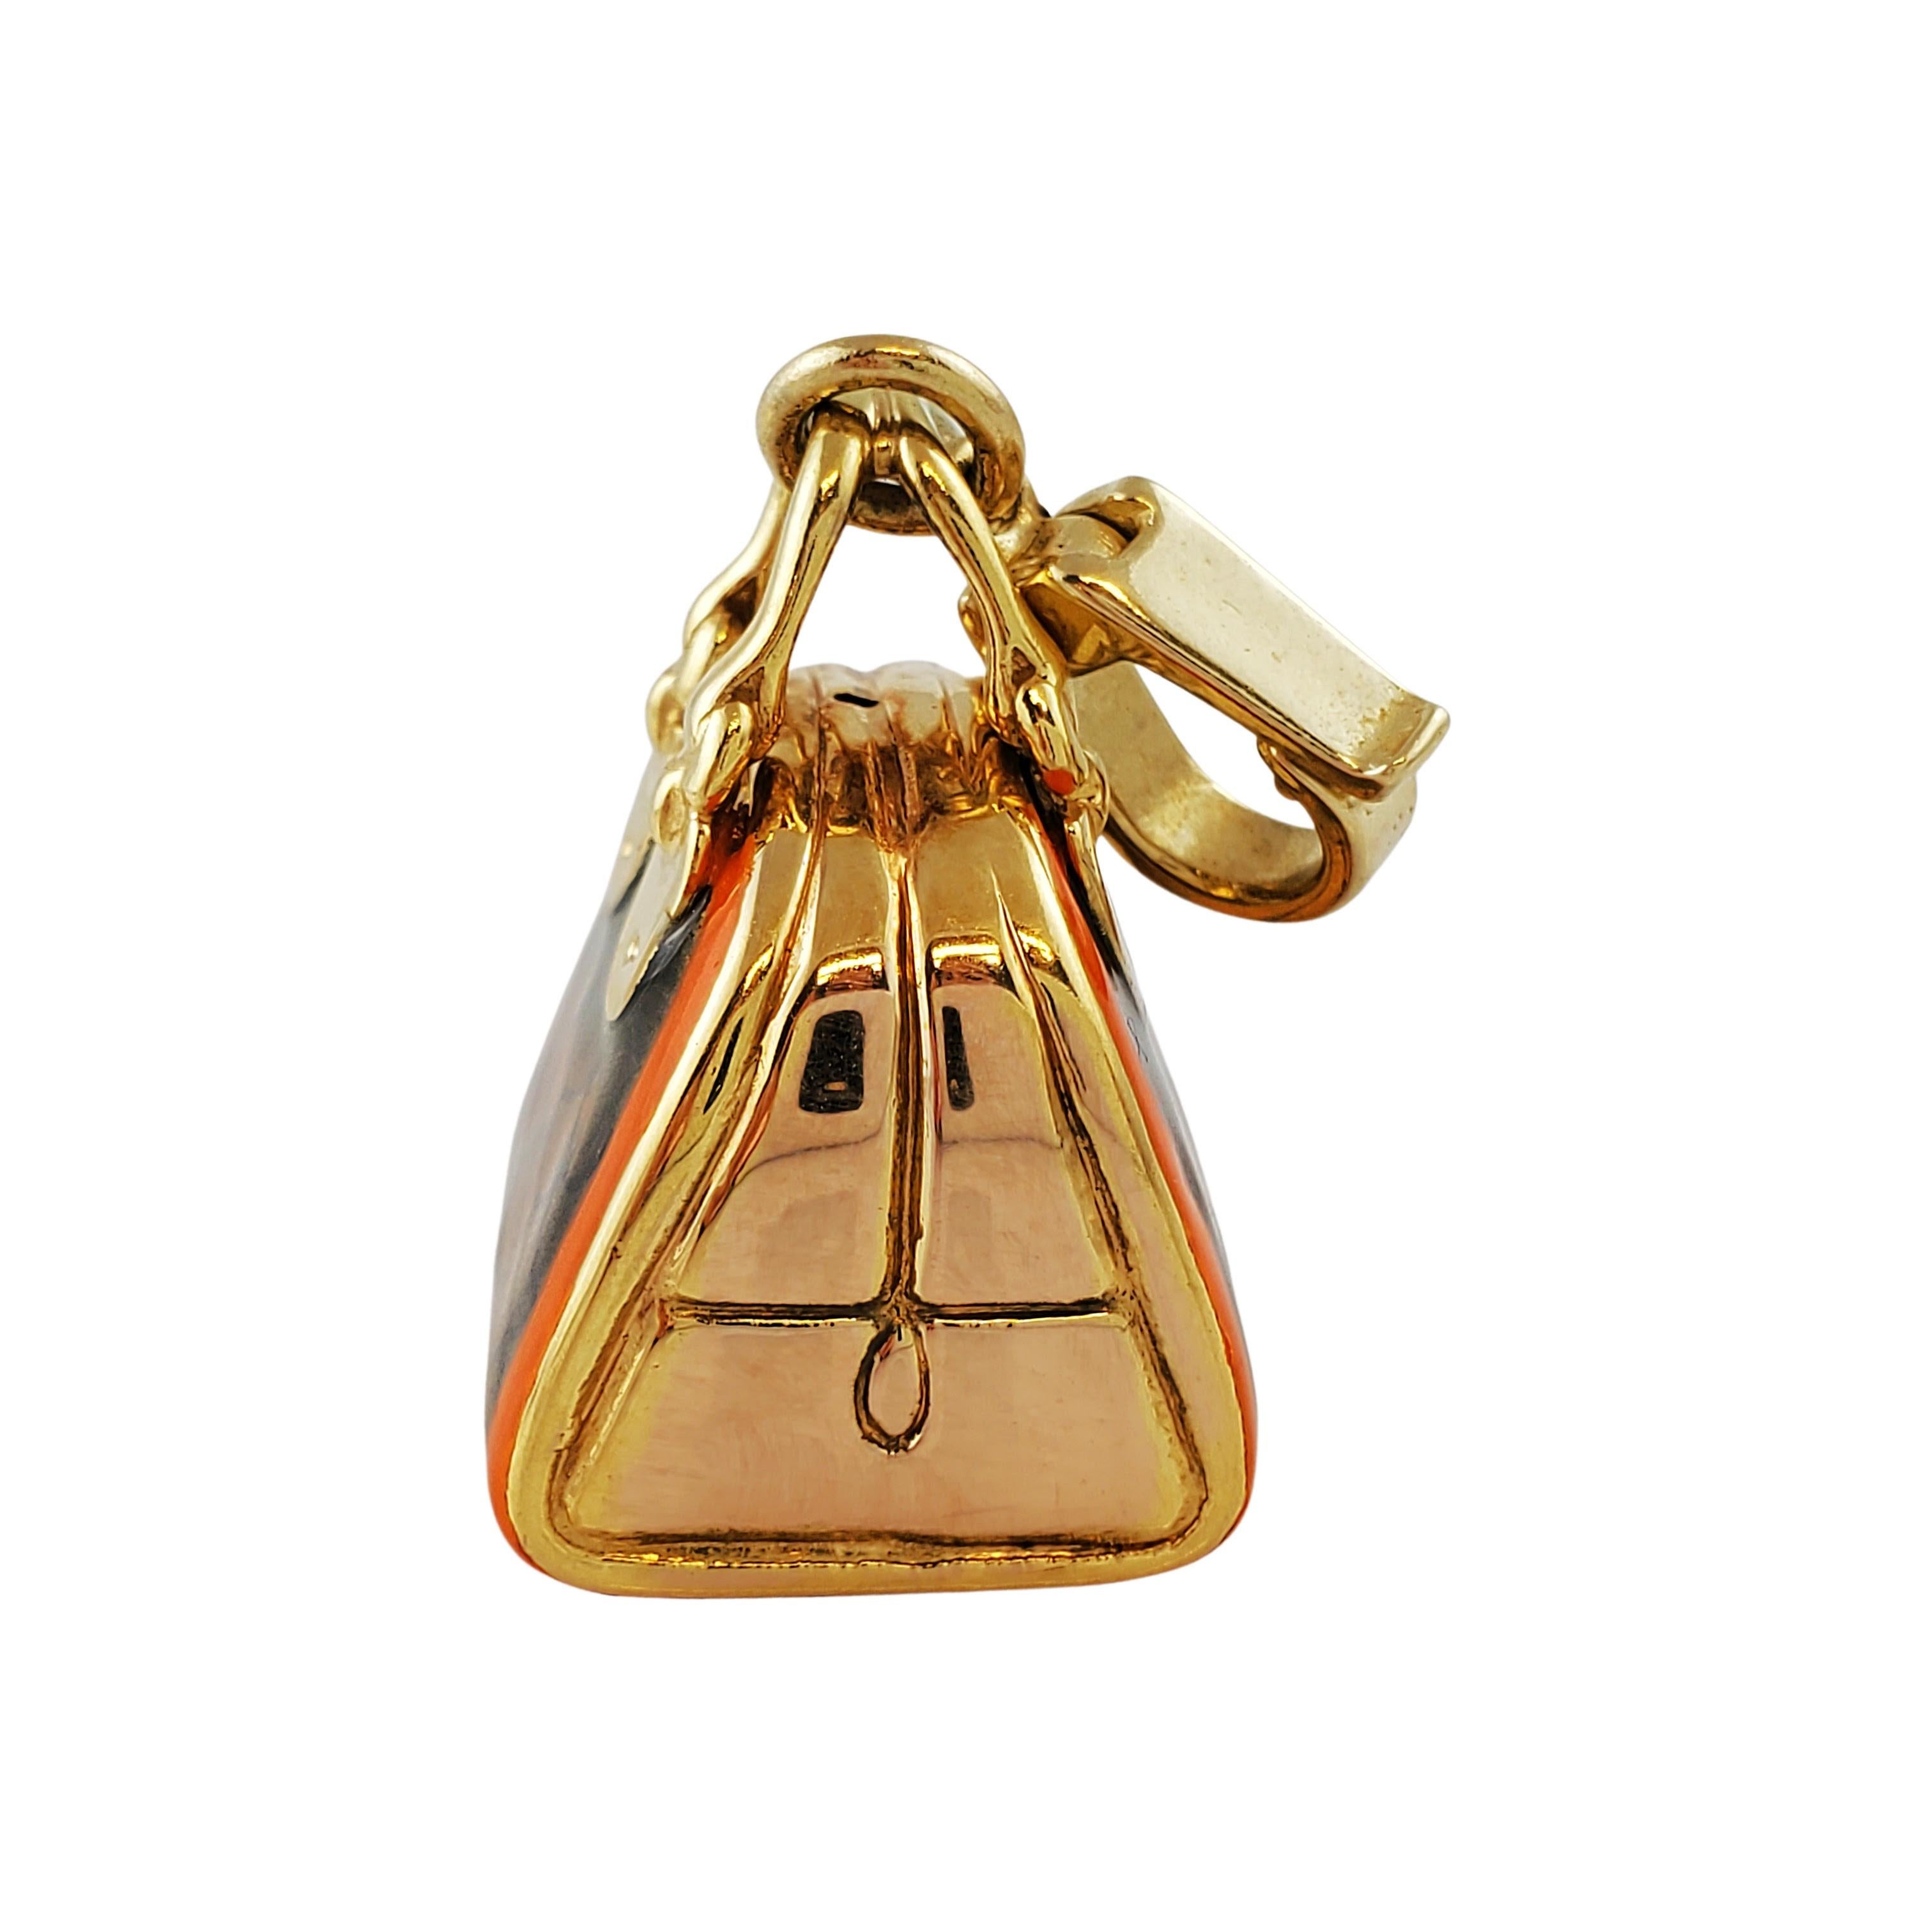 14K Yellow Gold Enamel Purse Charm

This adorable 3D purse charm is crafted in 14k yellow gold with exquisite detailing in the enamel of a fish scale pattern that shimmers with glitter. Perfect for the fashionista in your life!

Size: 21mm X